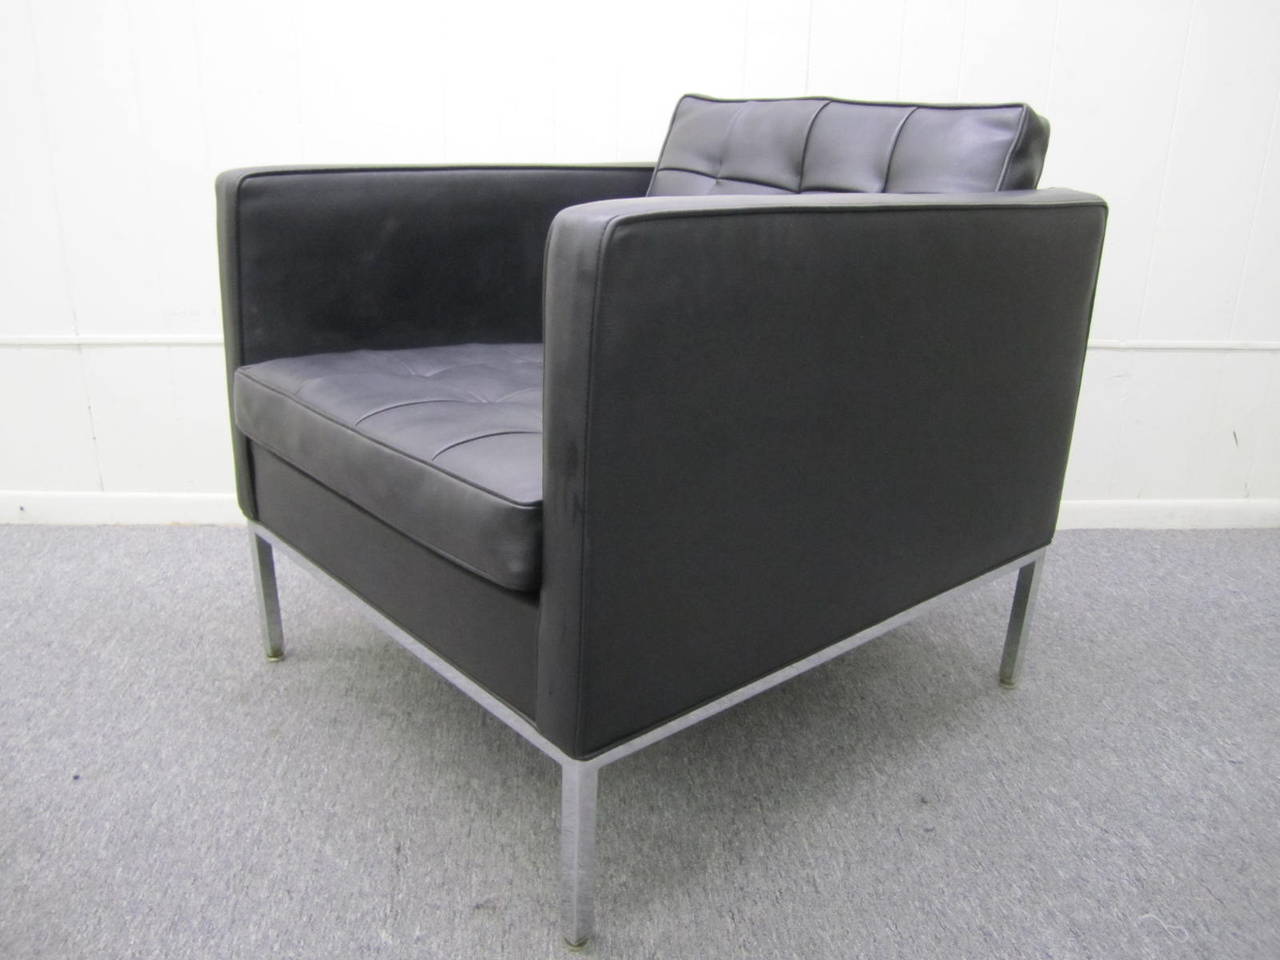 Signed Milo Baughman for Thayer Coggin lounge chair with solid chrome base.  The upholstery is a faux black leather and still looks nice but re-upholstery is  recommended.. The heavy chrome base is very shiny and in great condition.